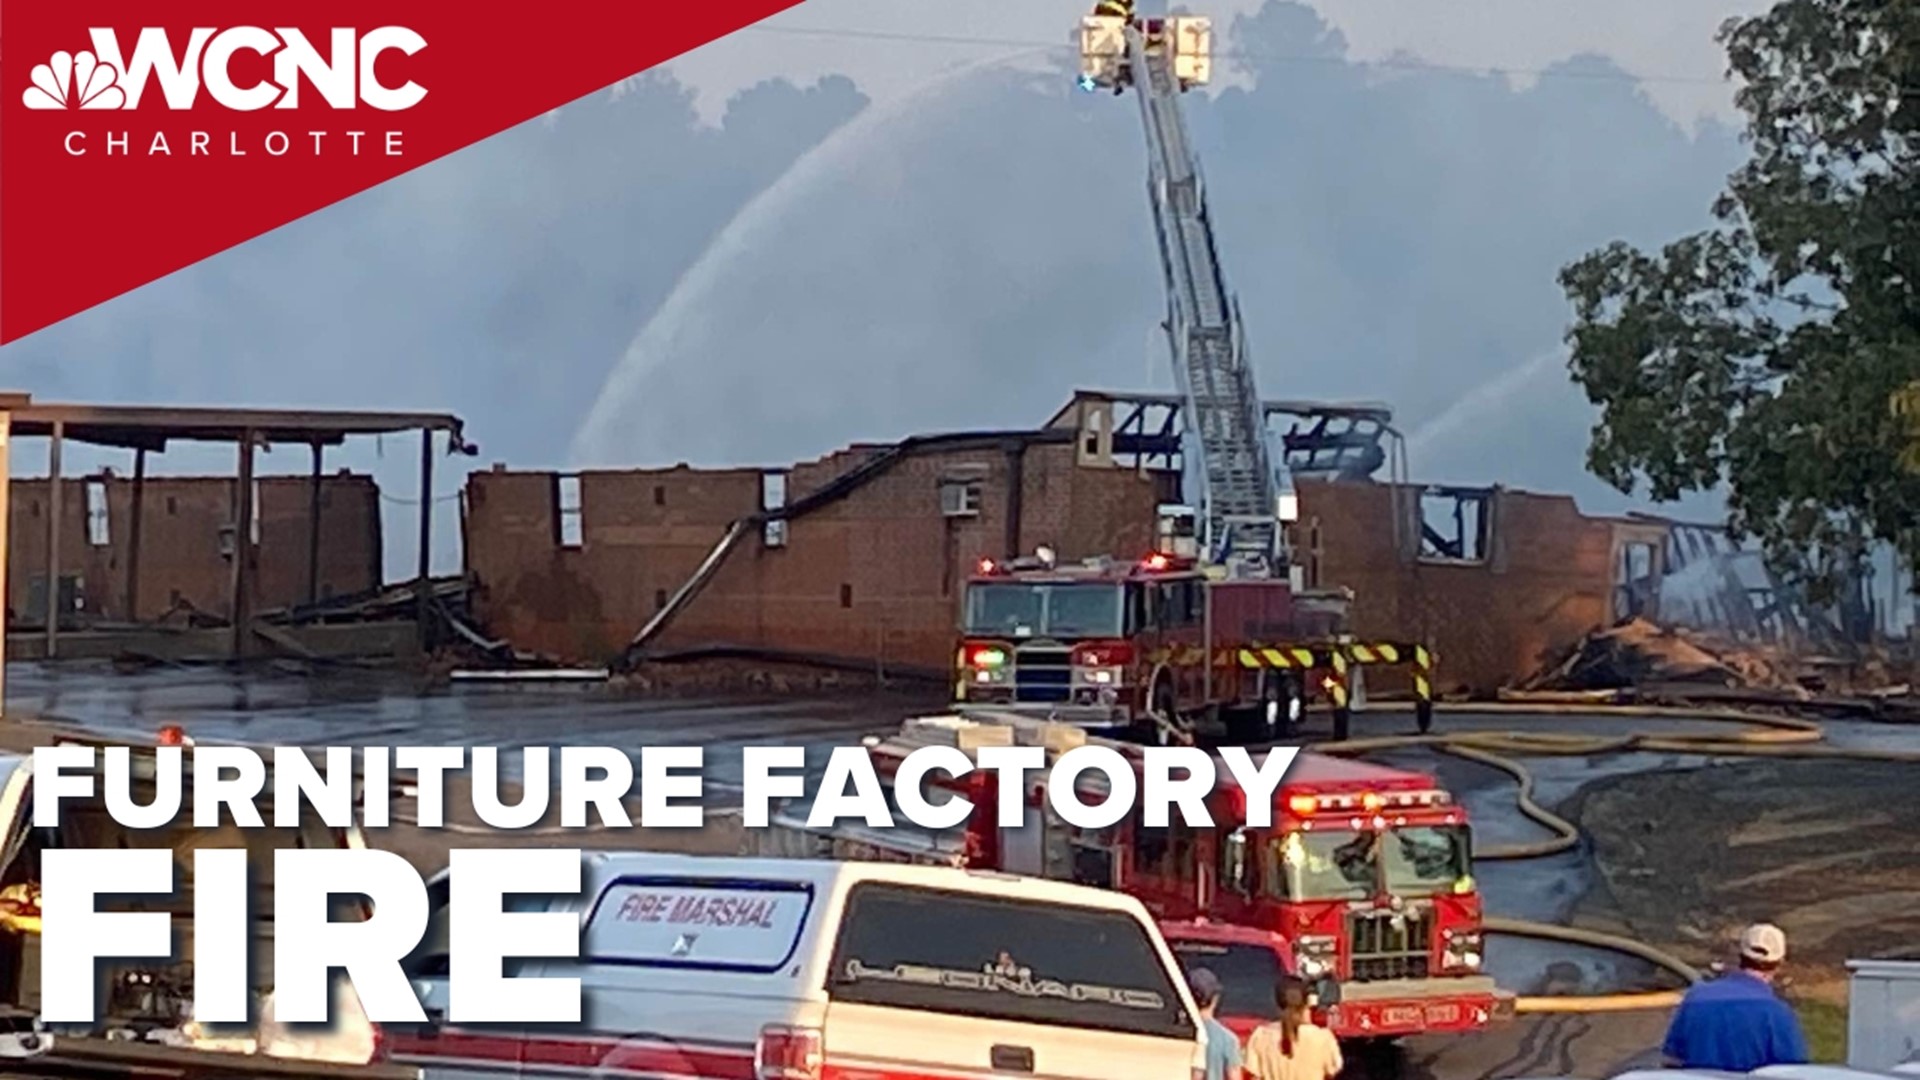 The Morgan Chair building is a total loss, and it's wracked the community that loved the family-owned business.